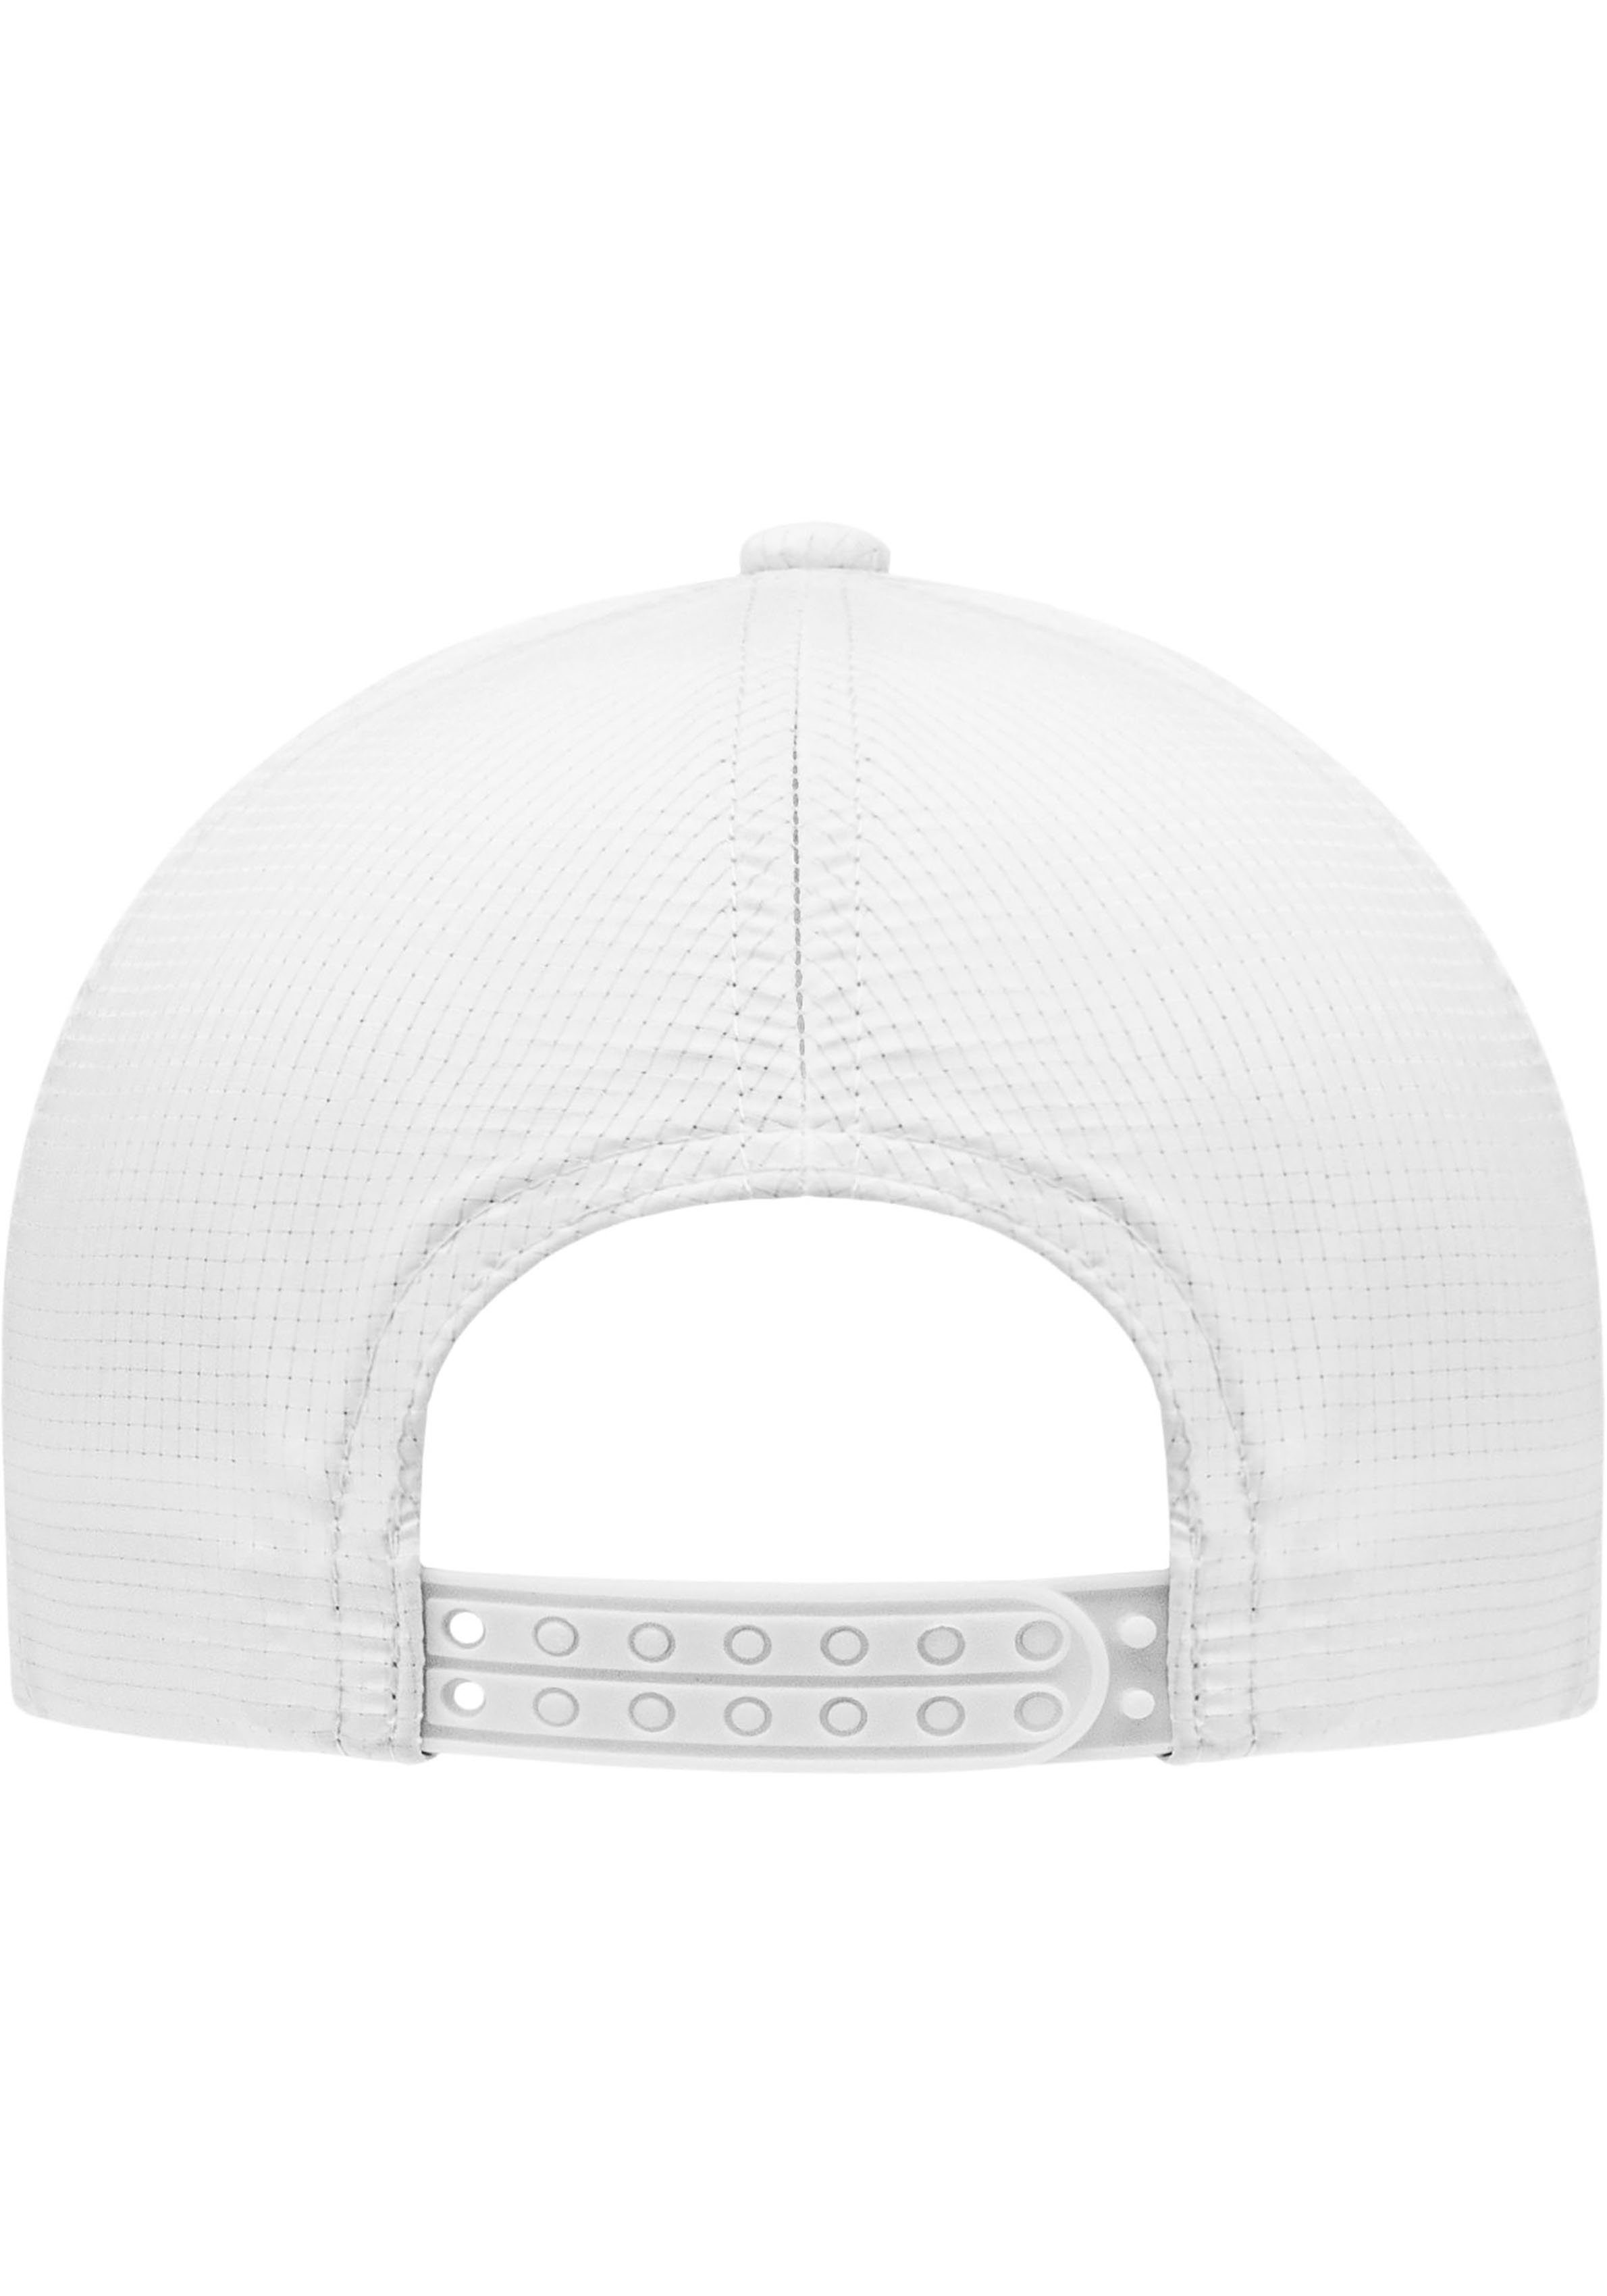 chillouts Cap Langley weiß Baseball Hat